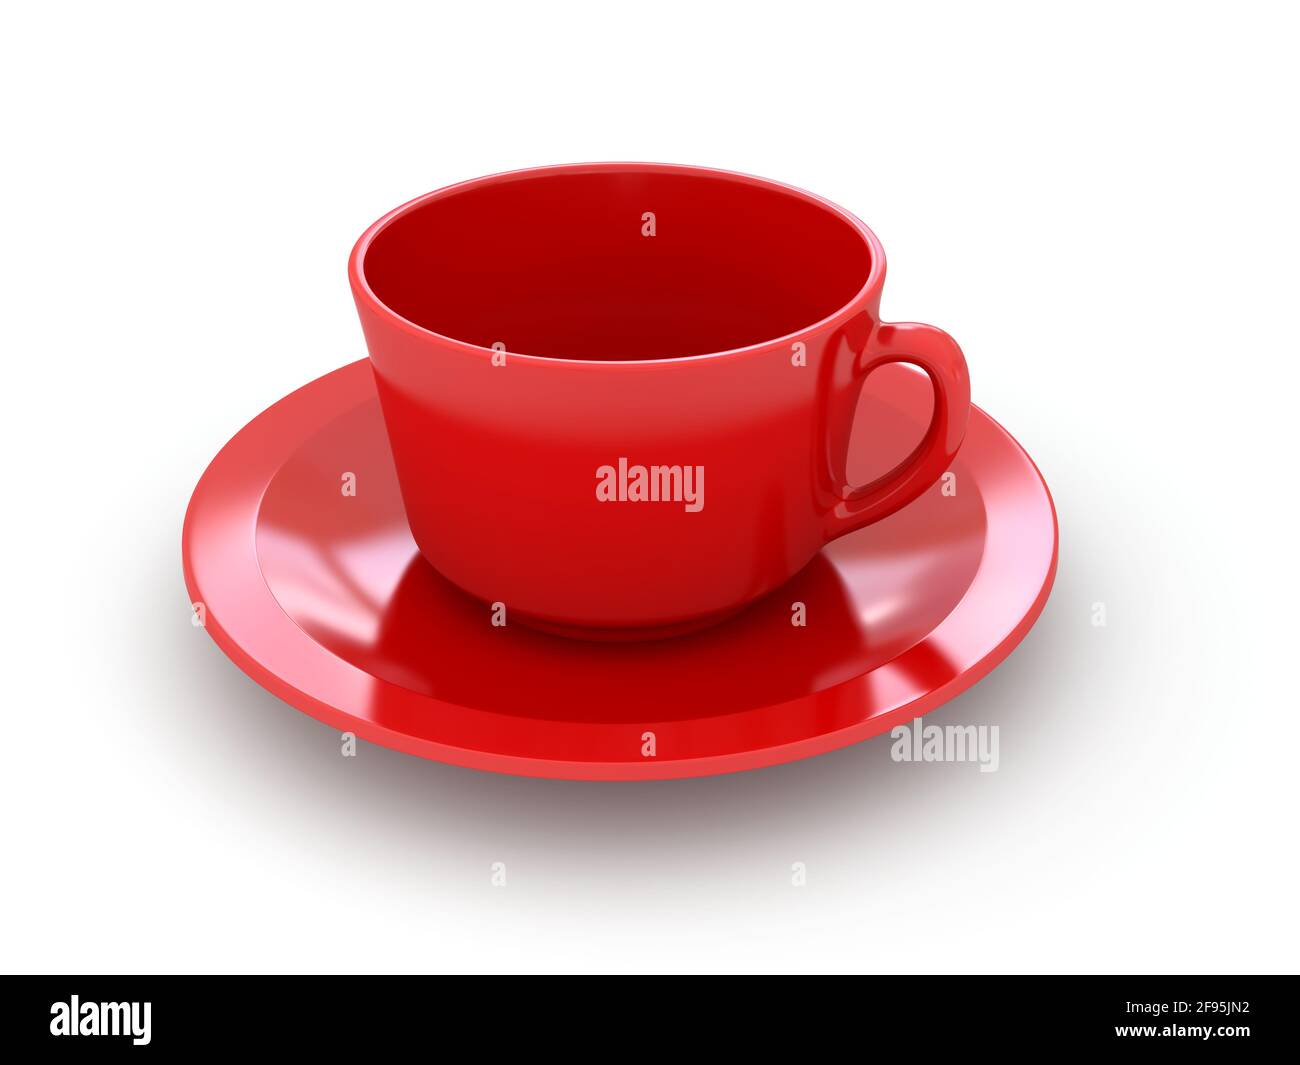 Red coffee cup and saucer on a white background. 3d rendered image Stock Photo